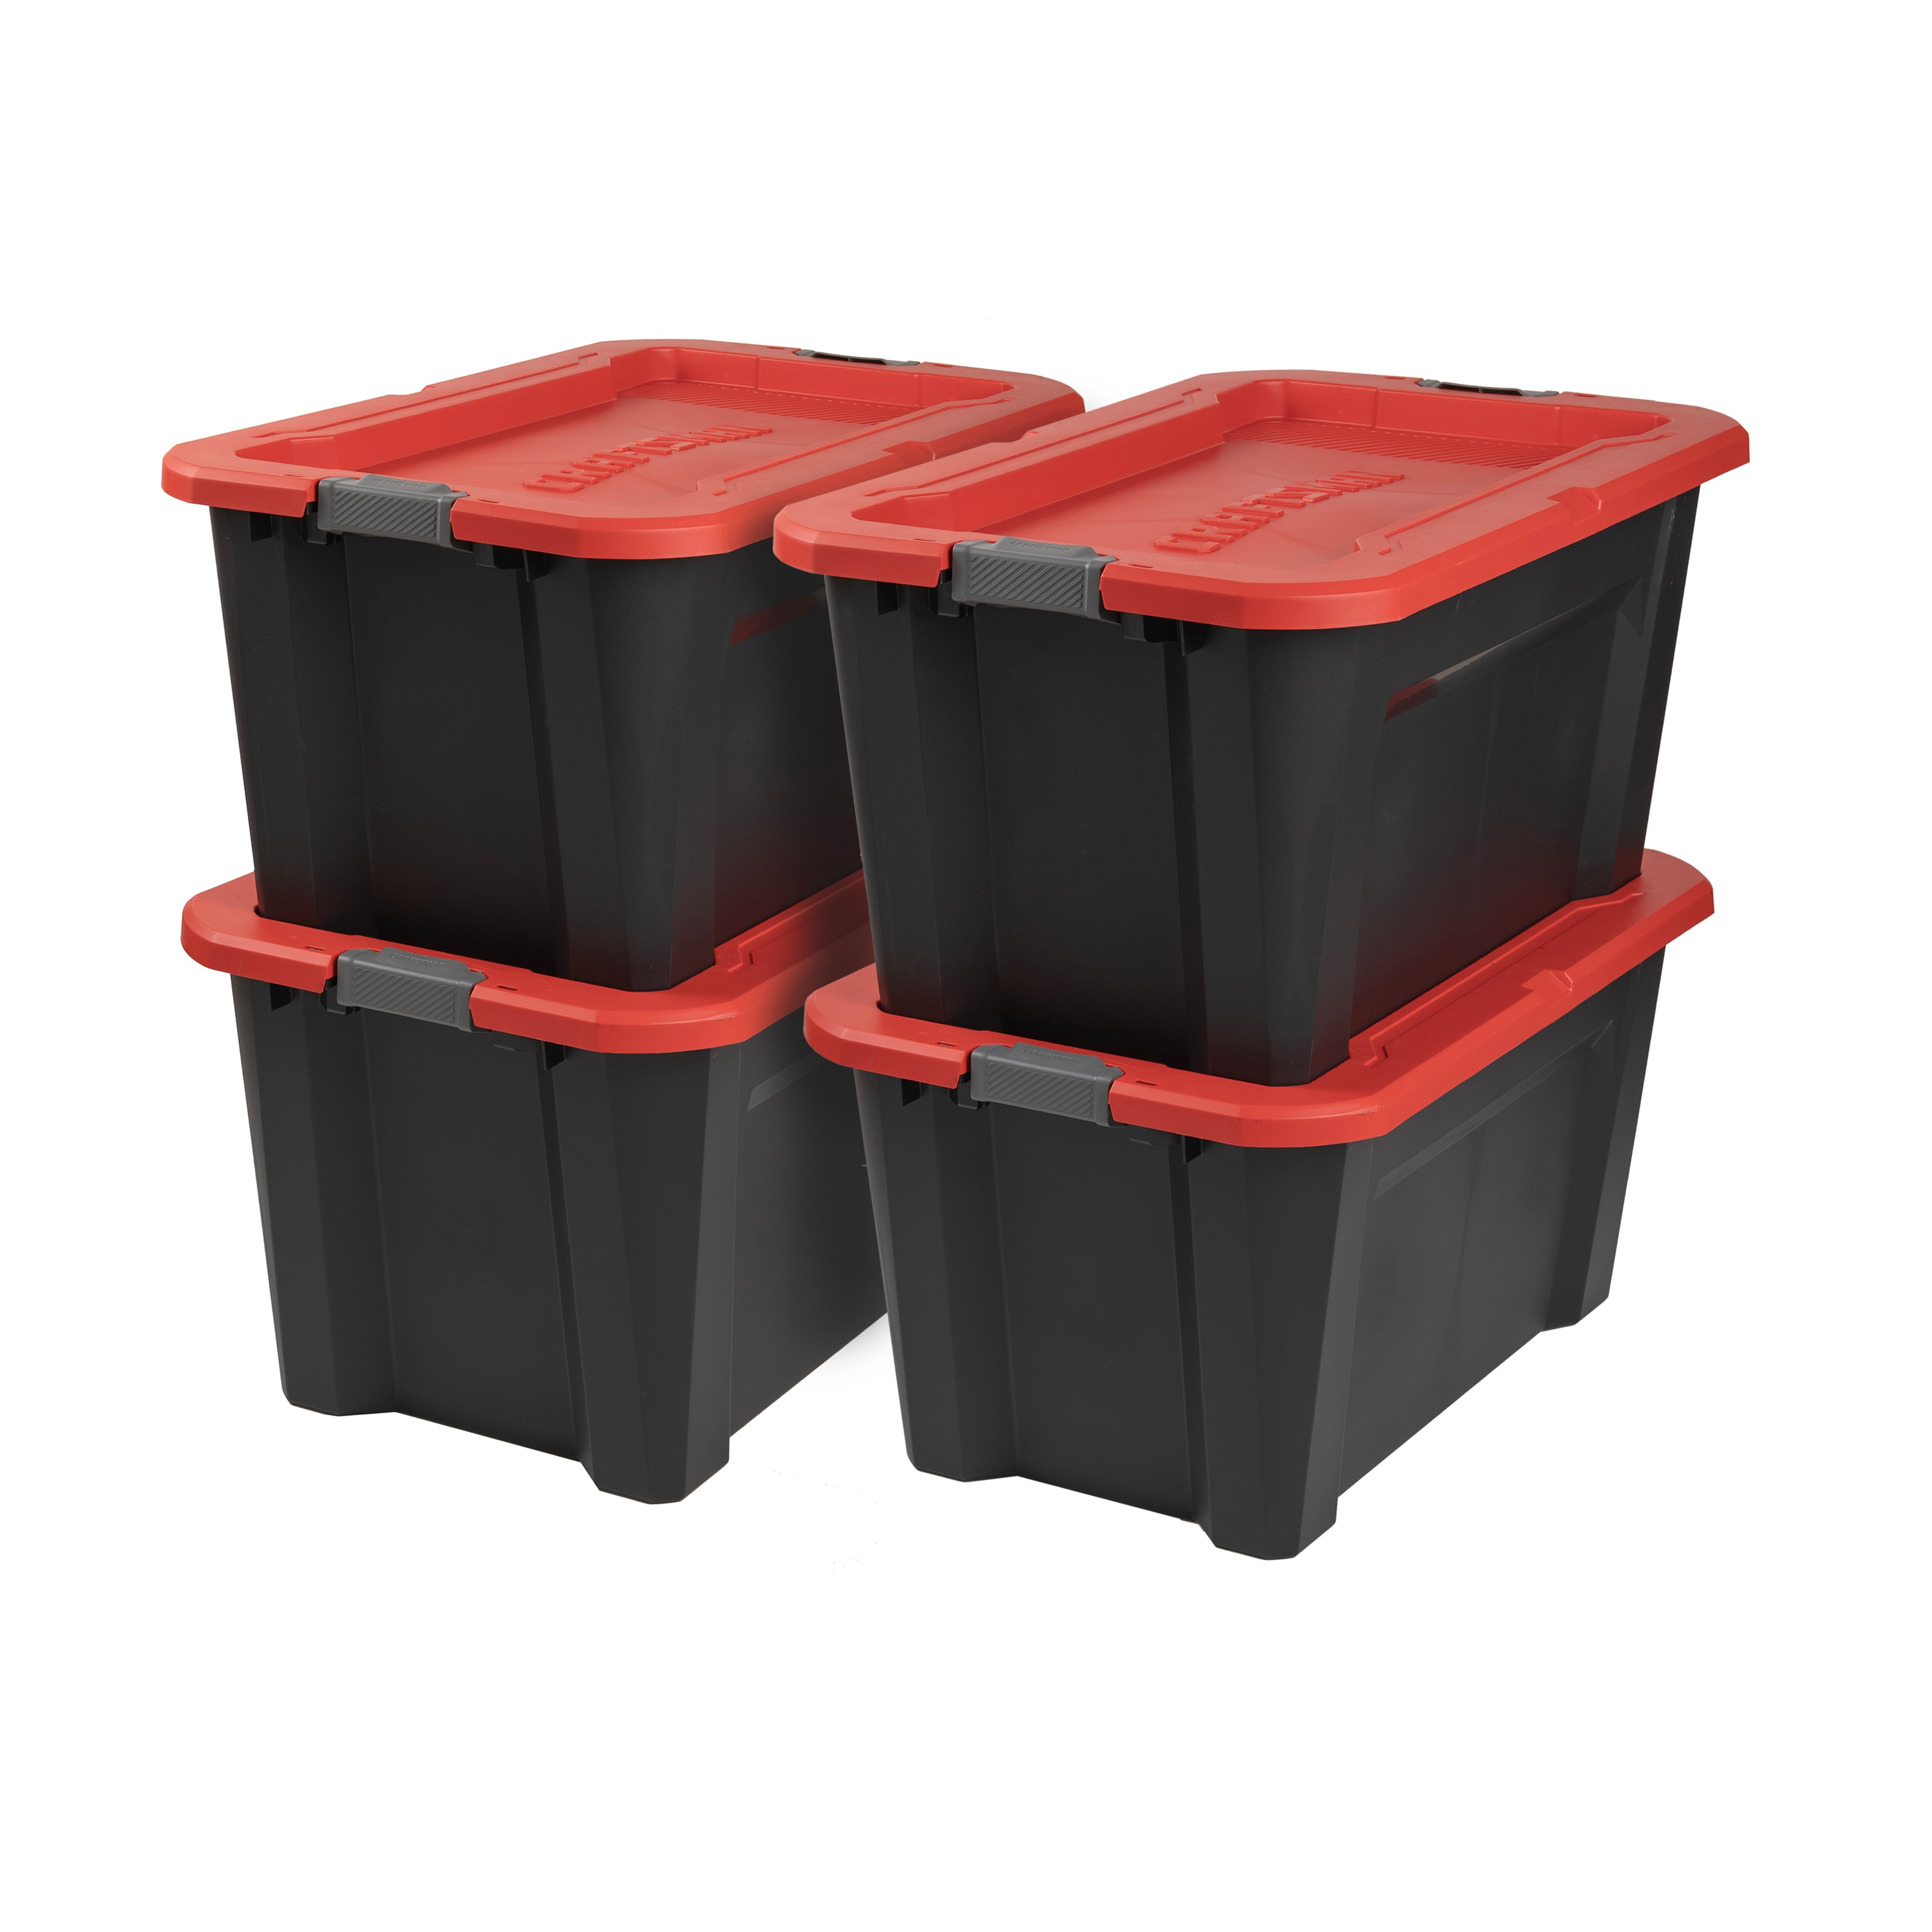 40 Gallon Craftsman Storage Bins on clearance at Lowes. In store purchase  only. : r/BuyItForLife